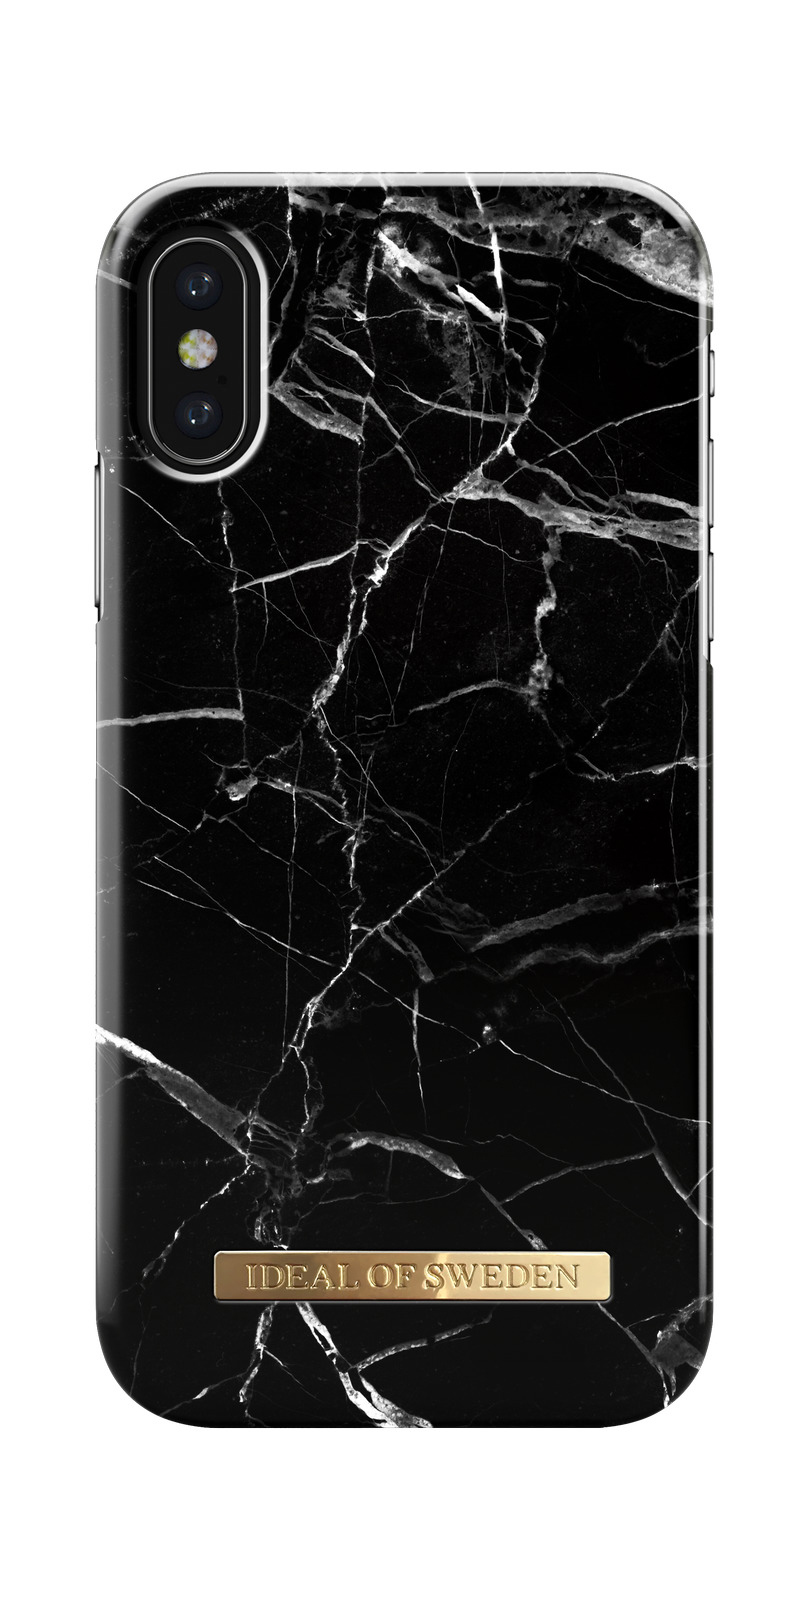 X, iPhone Apple, SWEDEN Marble Backcover, Black IDEAL Fashion, OF